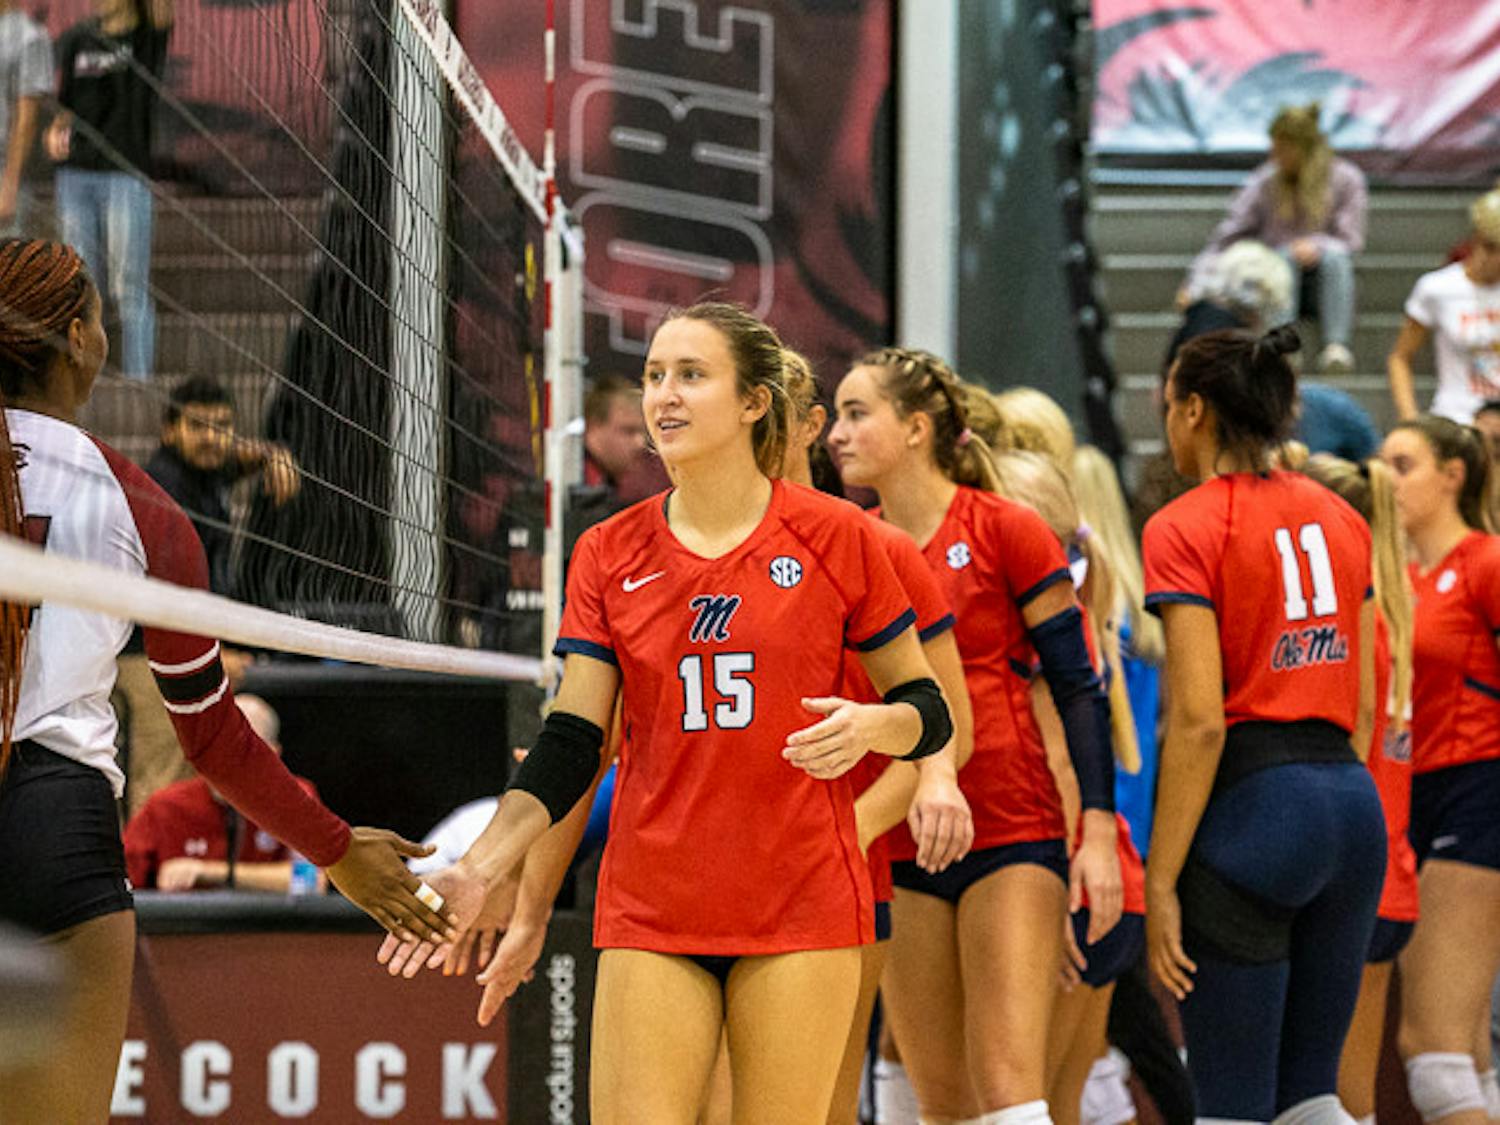 Ole Miss freshman setter Aly Borellis high-fives a member of the South Carolina volleyball team after their matchup on Nov. 5, 2022. Ole Miss won the match 3-1, scoring 25-21 in the final set of the game.